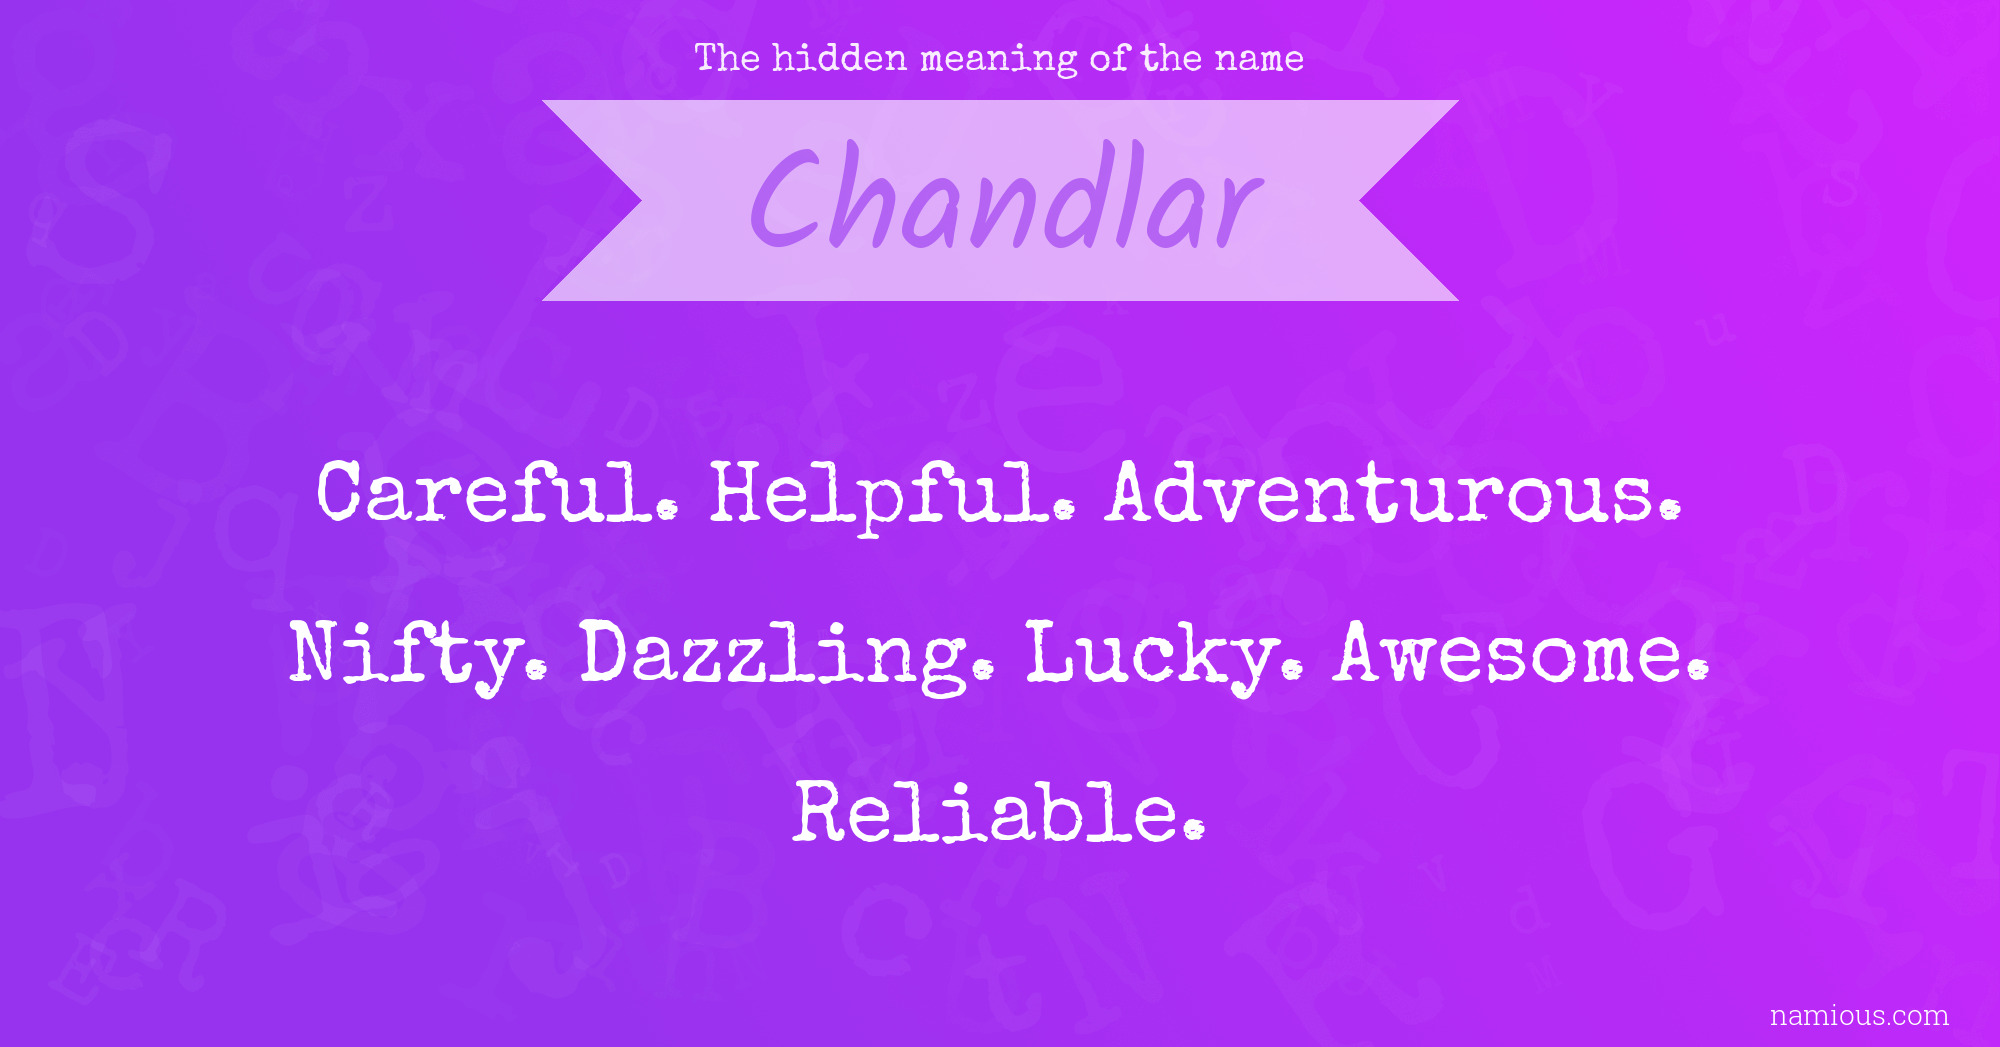 The hidden meaning of the name Chandlar